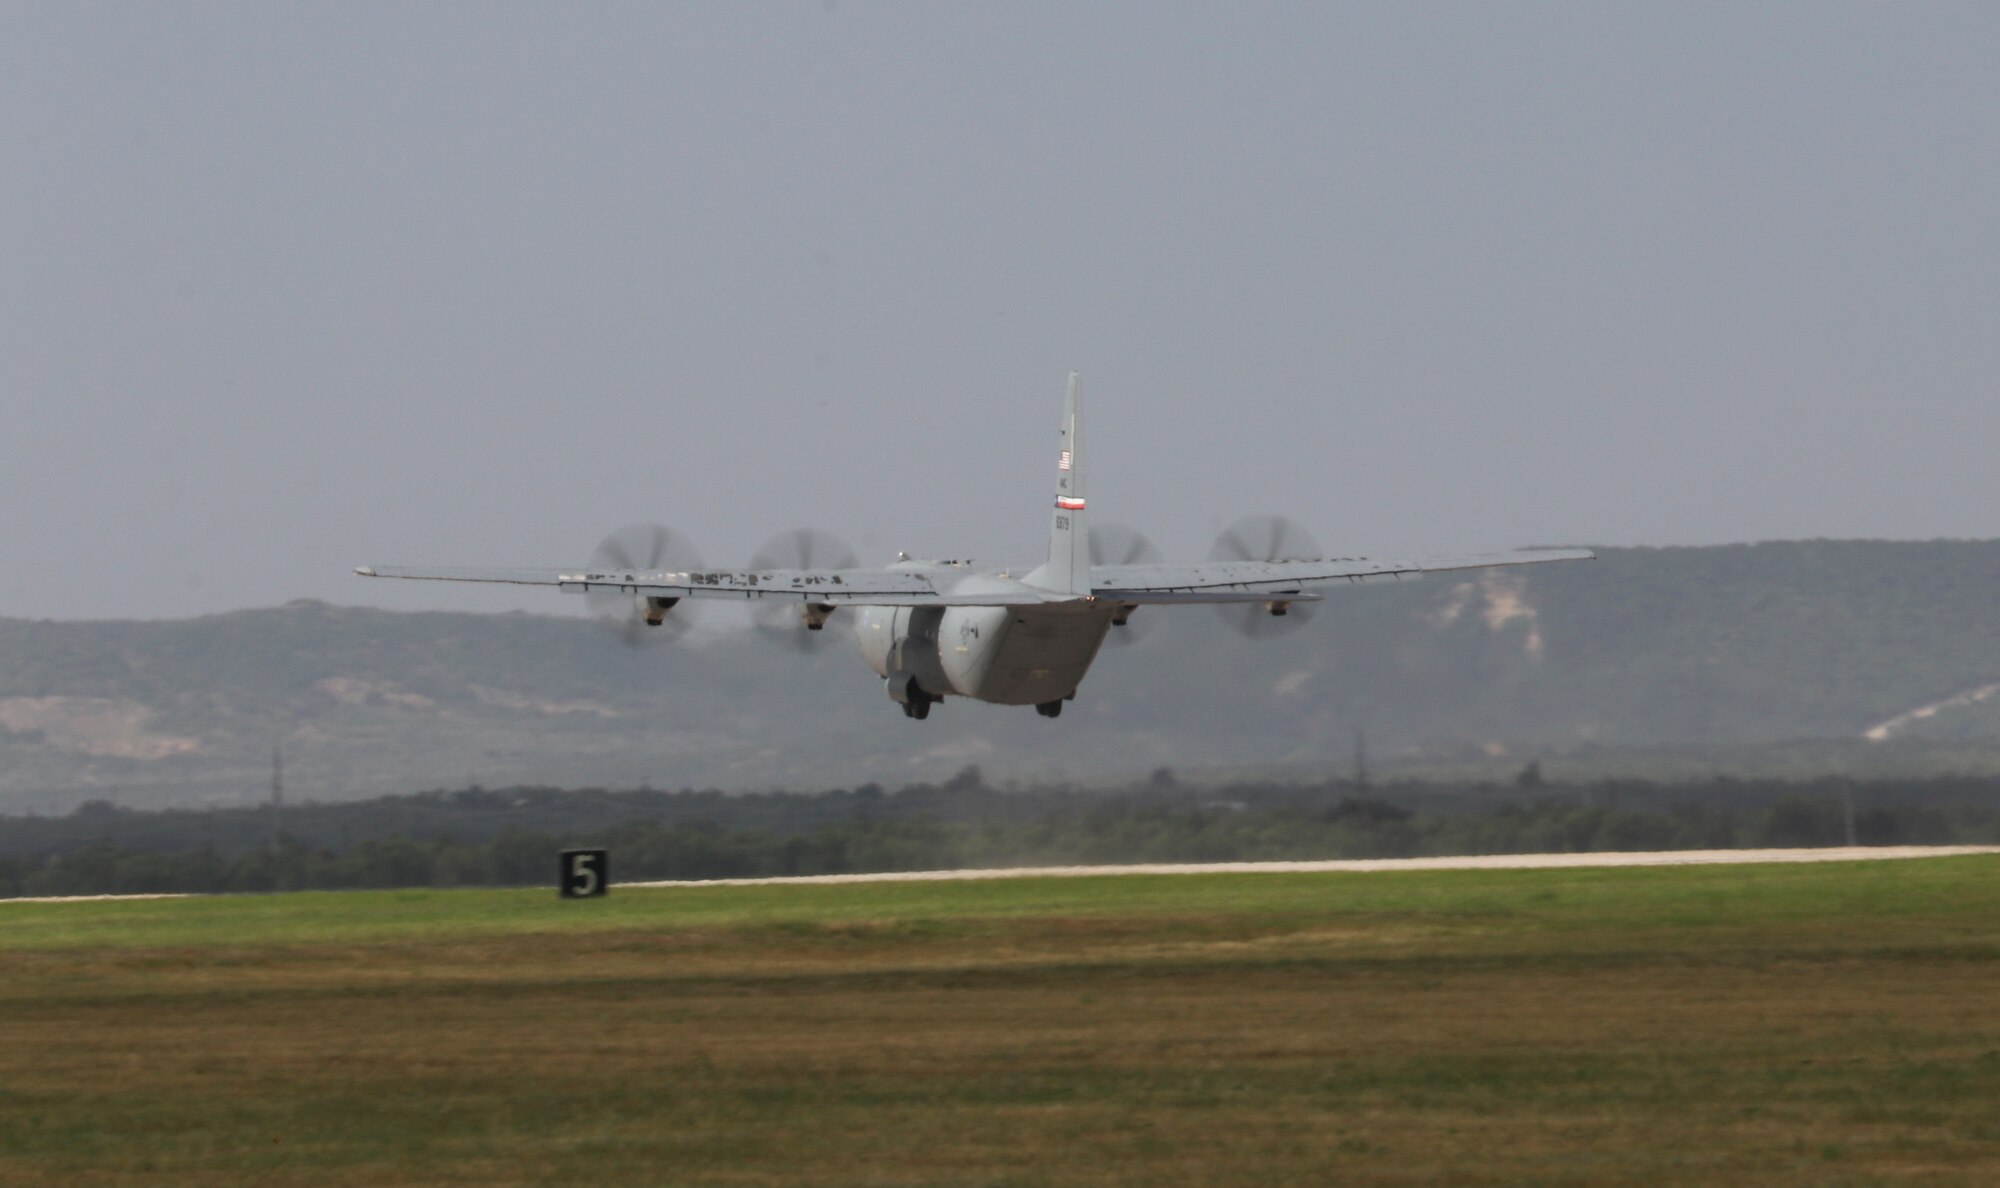 A C-130J Super Hercules aircraft from the 317th Airlift Wing takes off during a Joint Forcible Entry at Dyess Air Force Base, Texas, July 14, 2020.